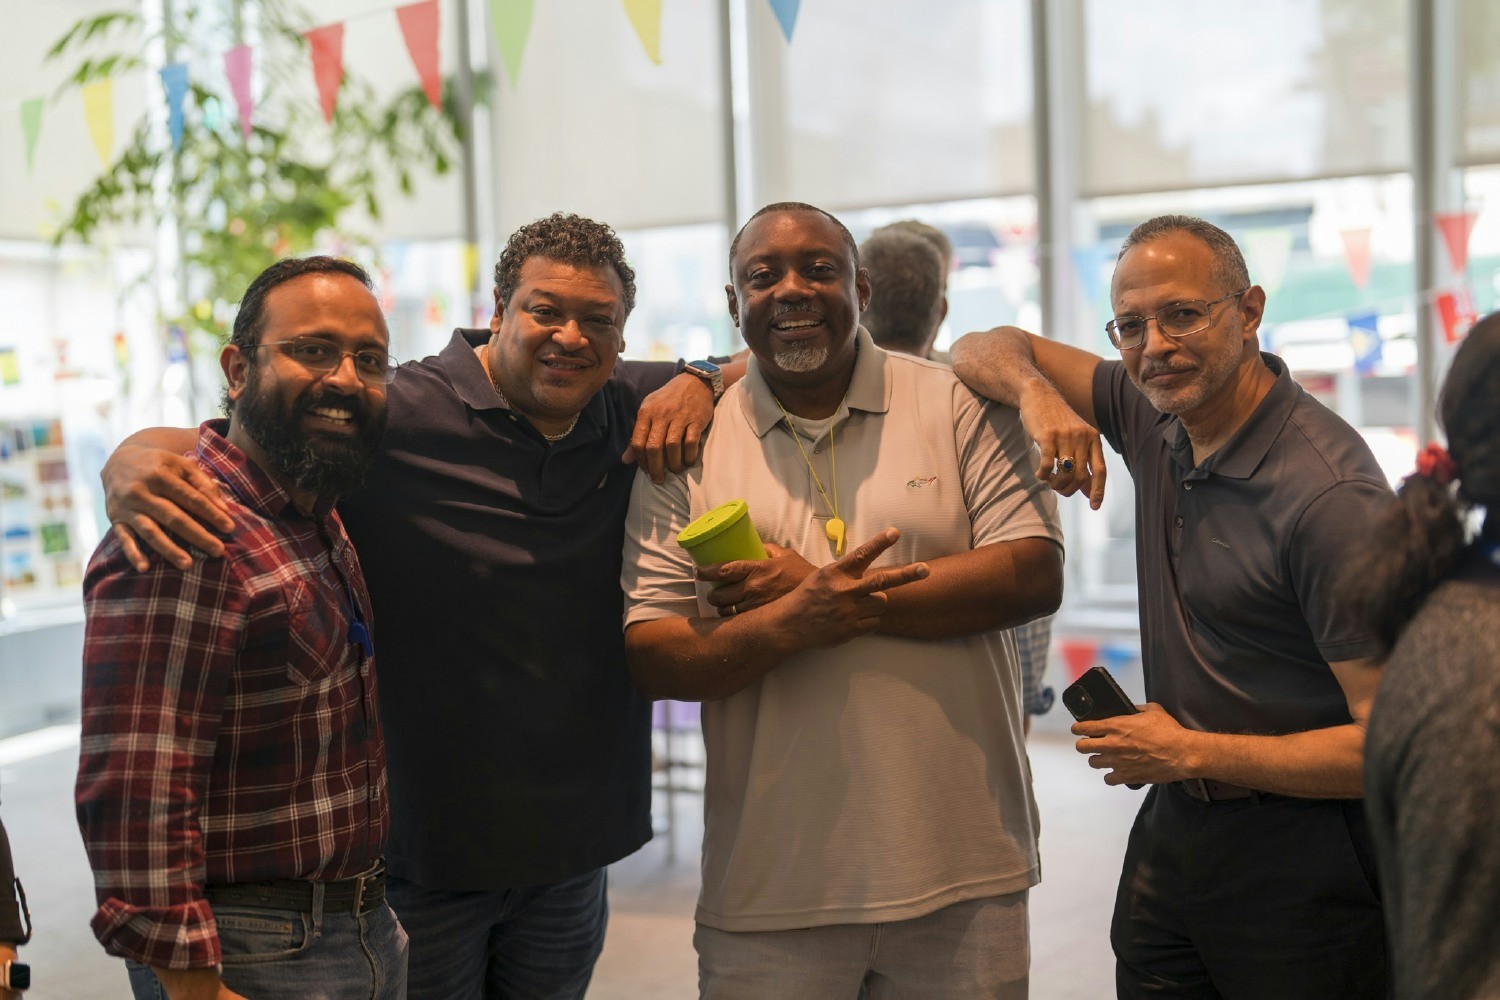 Some of our IT staff at our Caribbean Heritage Month celebration where we enjoyed delicious foods and dance!